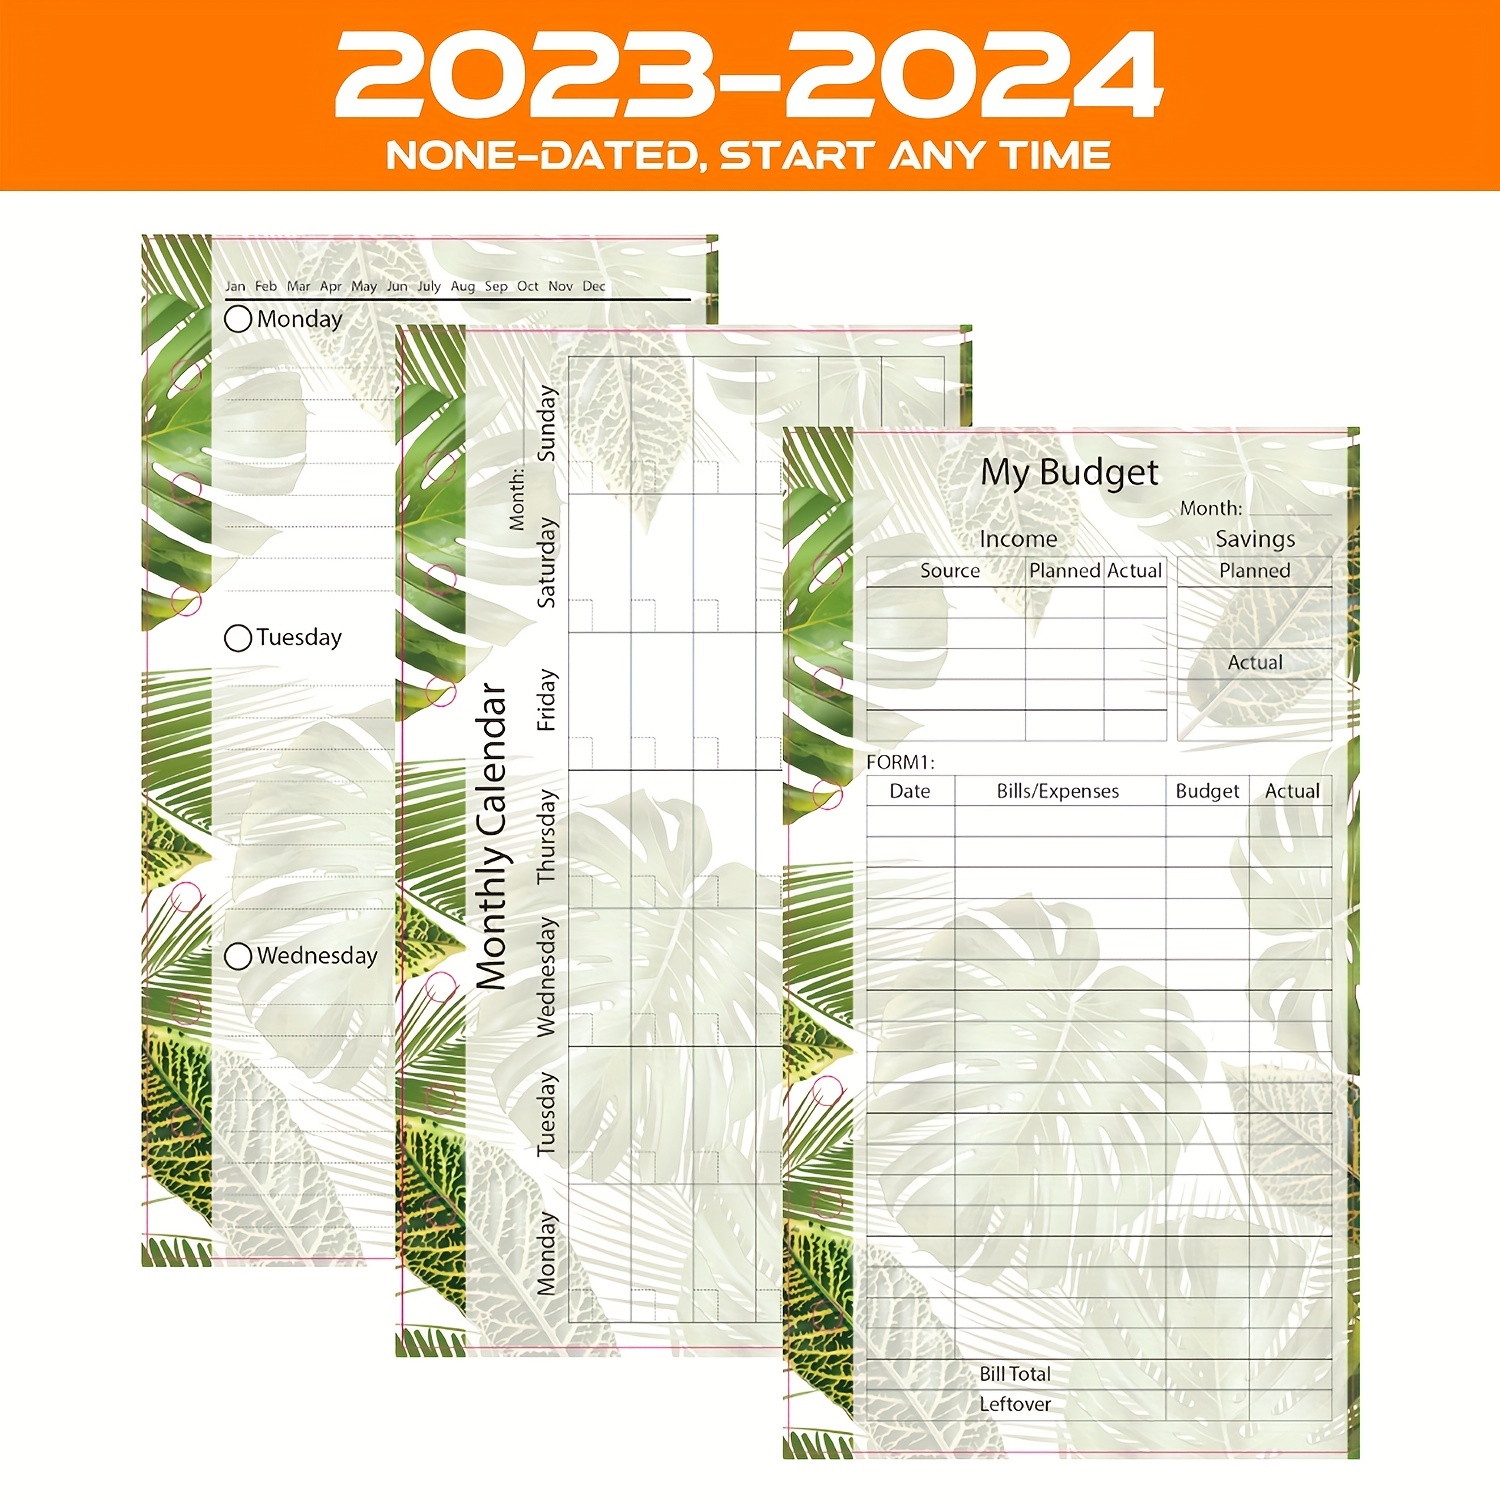 2024 Dated Planner Inserts, Monthly, Monday Start